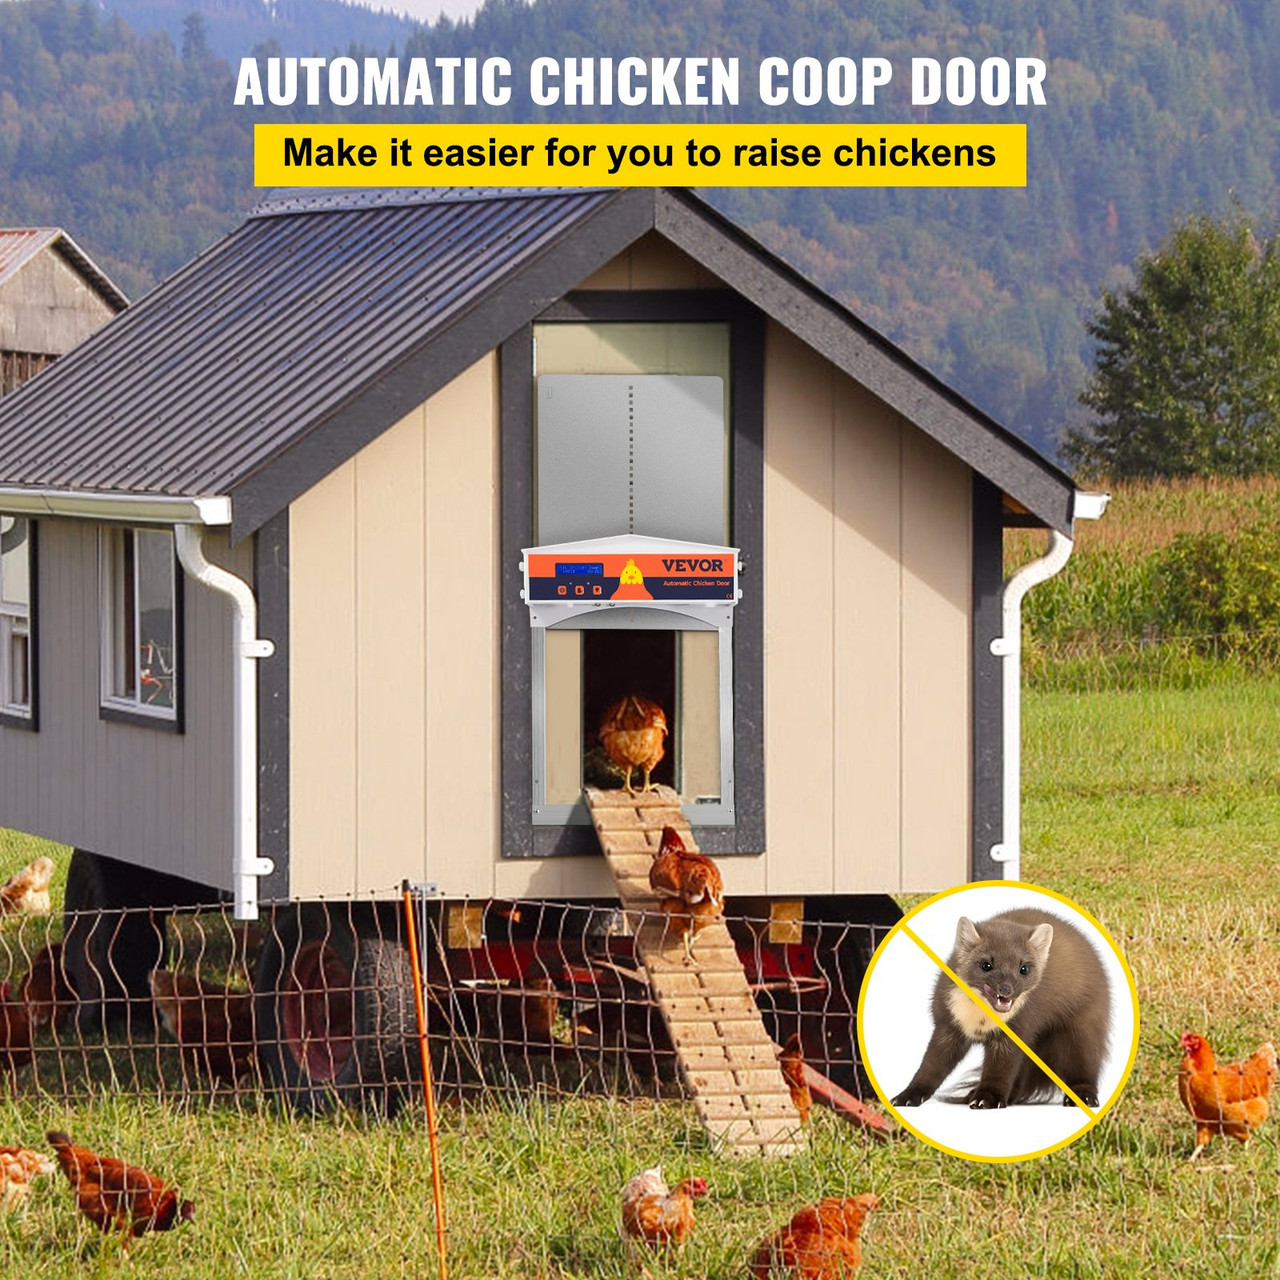 Gray Automatic Chicken Coop Door, Auto Close, Gear Lifter Galvanized Poultry Gate with Evening and Morning Delayed Opening Timer & Light Sensor, Battery Powered LCD Screen, for Duck